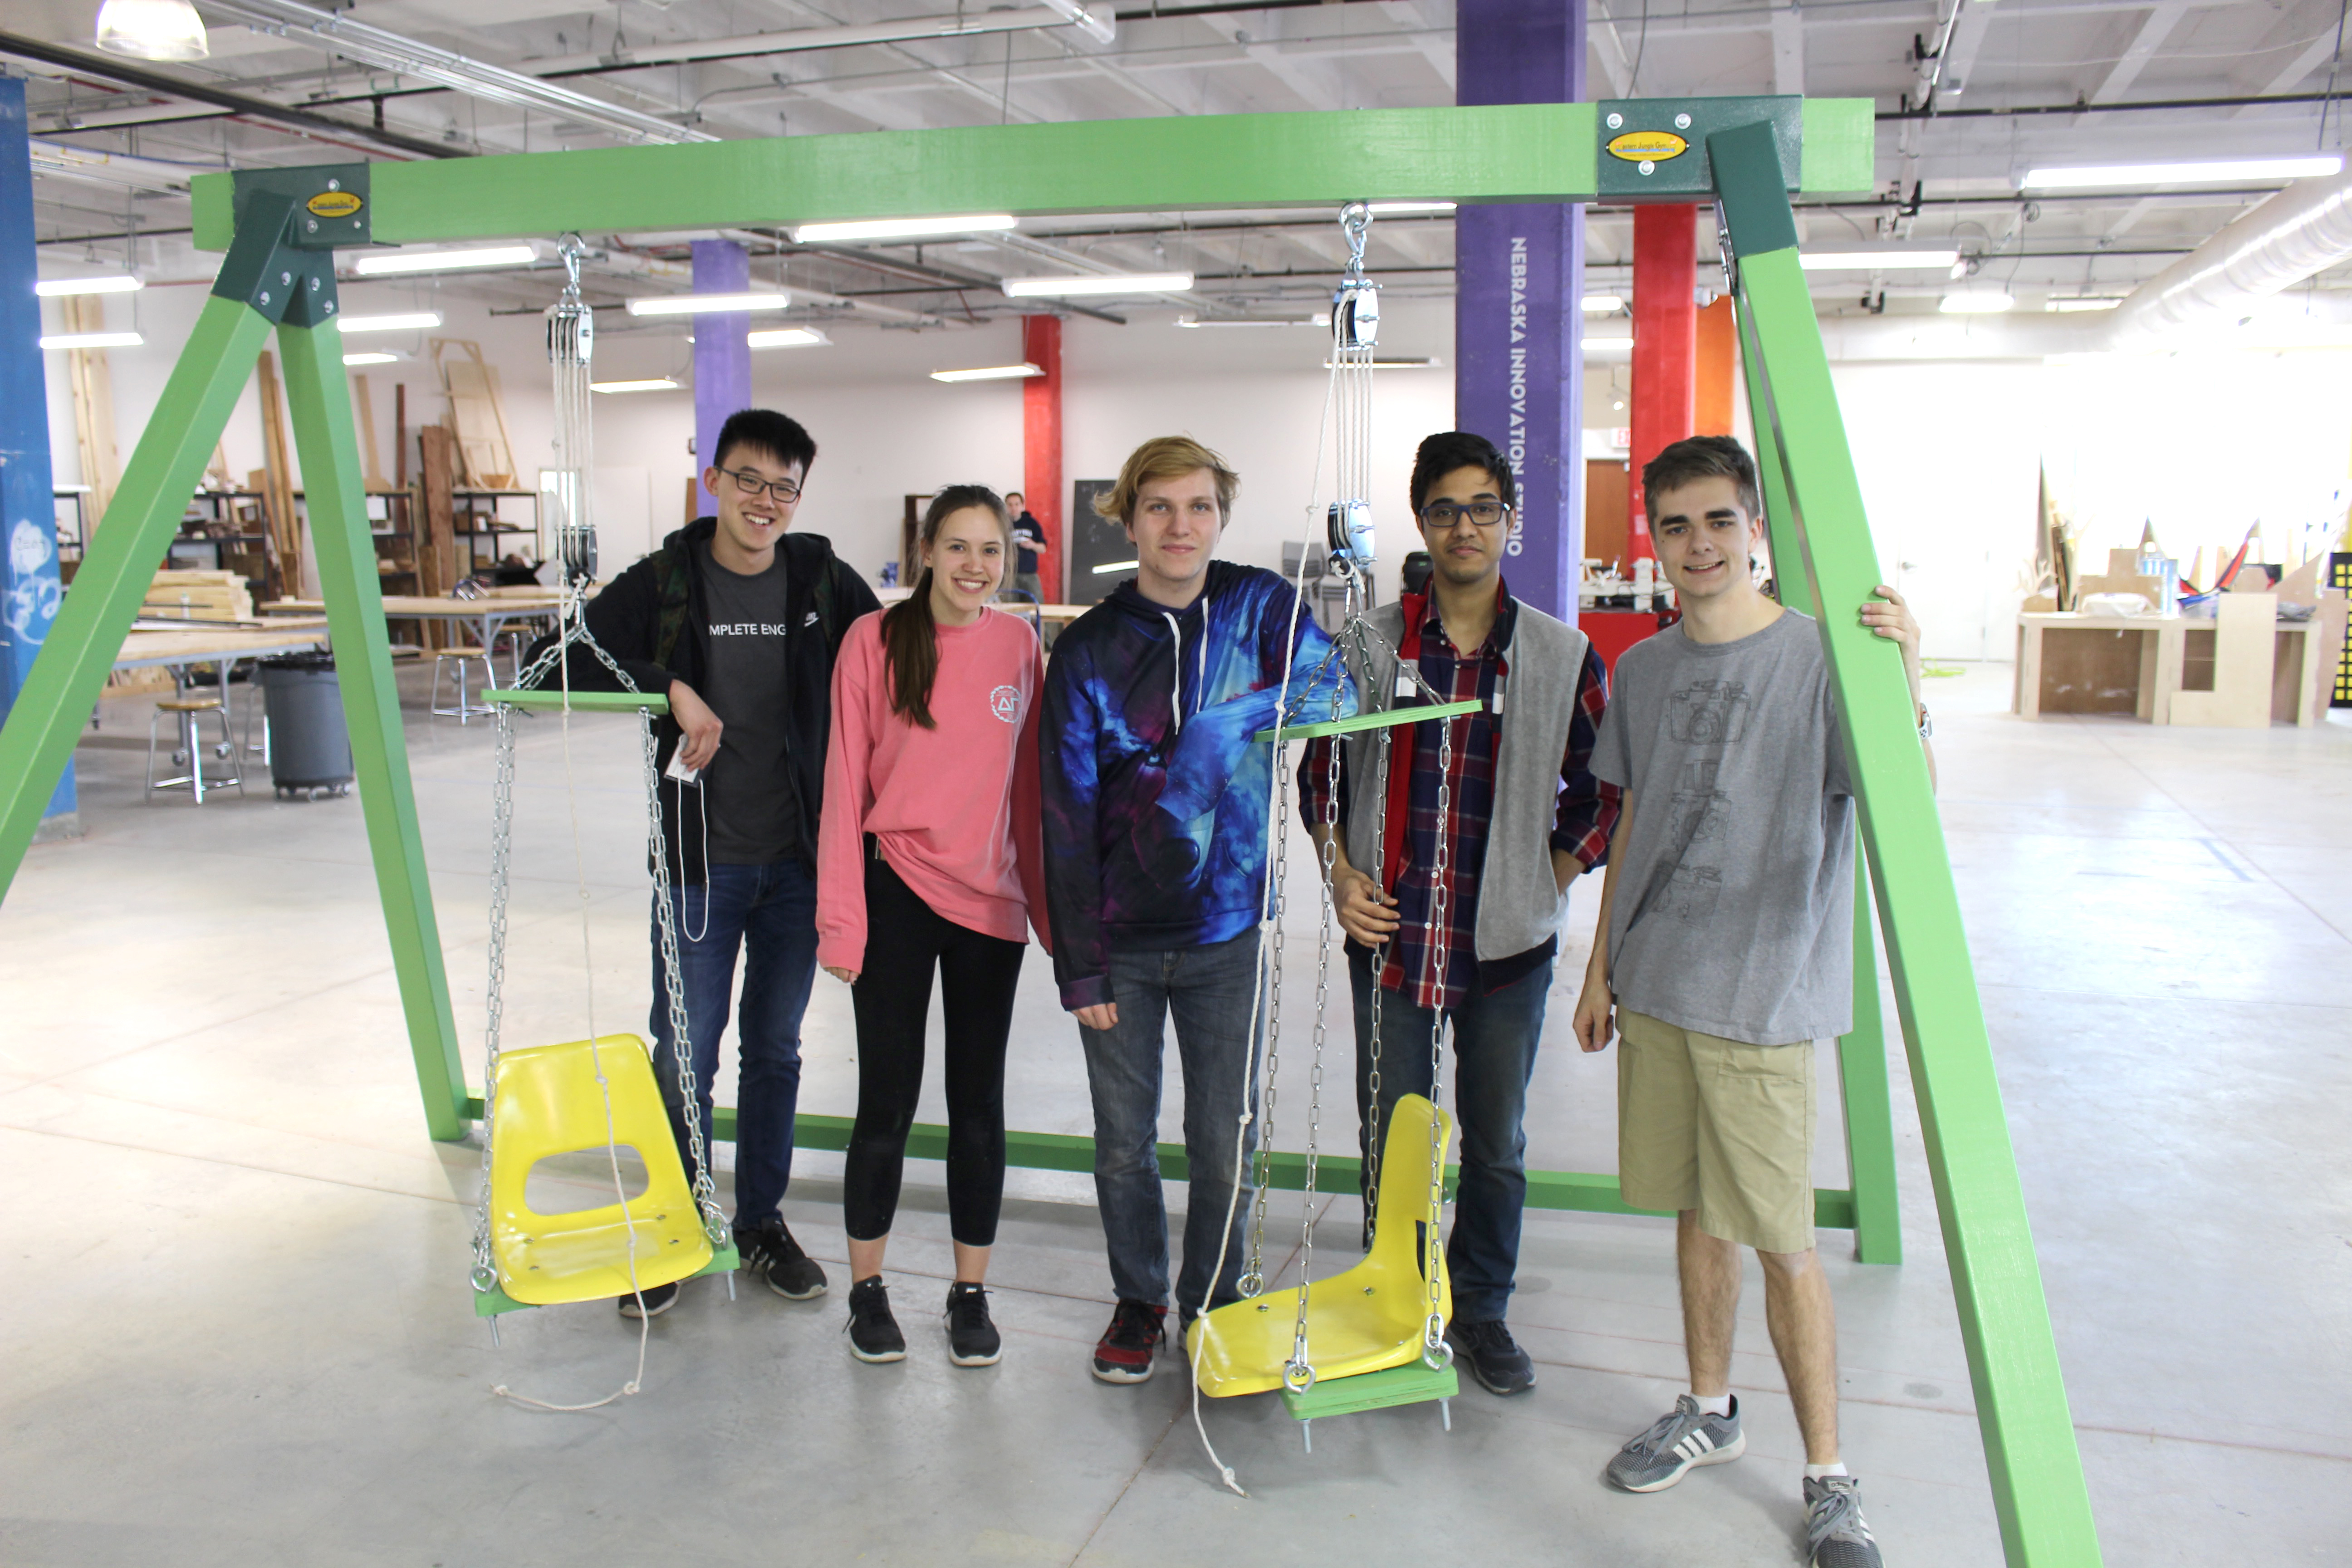 Nebraska Engineering students were part of the Nebraska Theme Park Design Group, which designed and built a new attraction - the Superhero Swing - for the Lincoln Children's Museum.